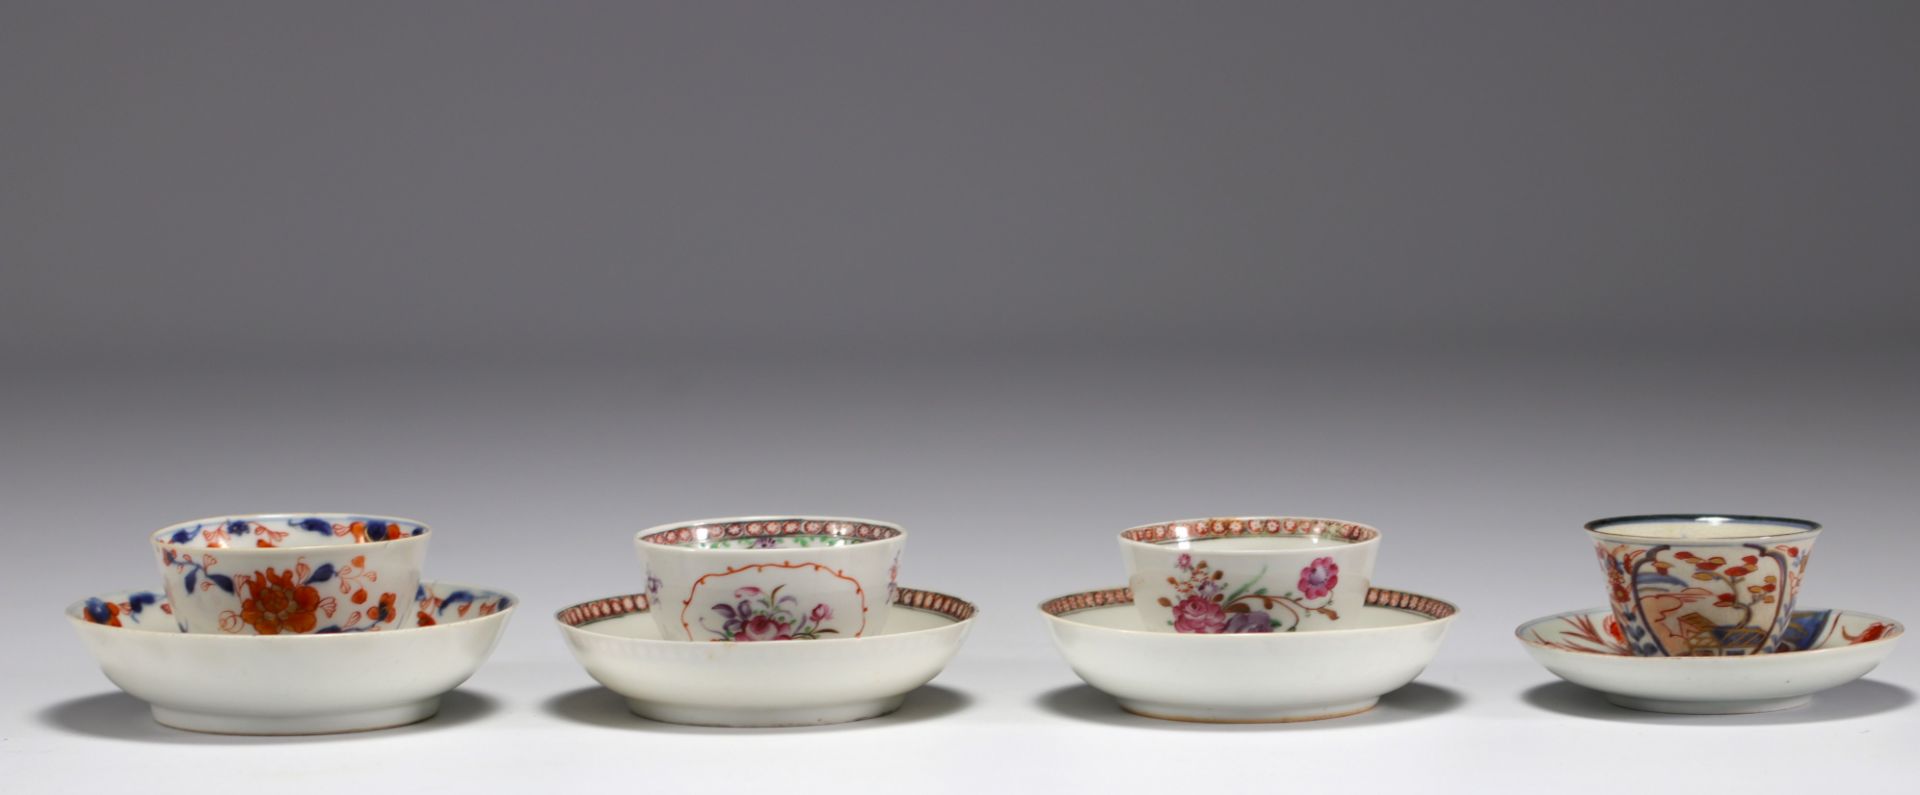 China - Set of various pieces of polychrome porcelain, 18th century.